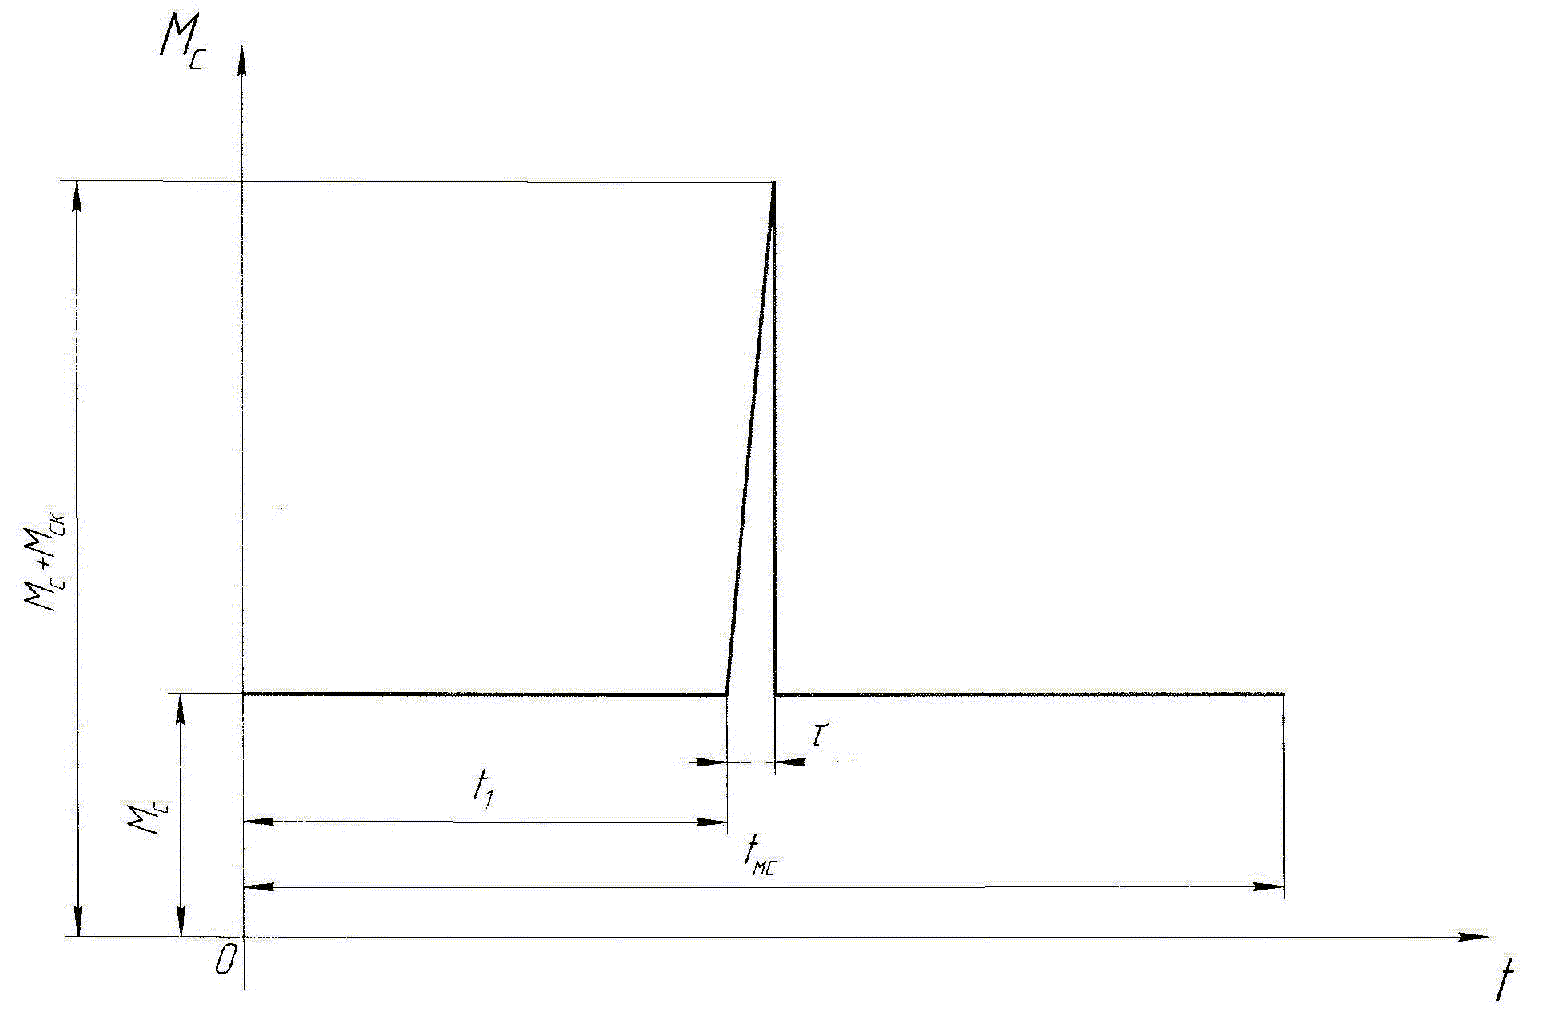 Figure 1 - Change of the resistance moment in time